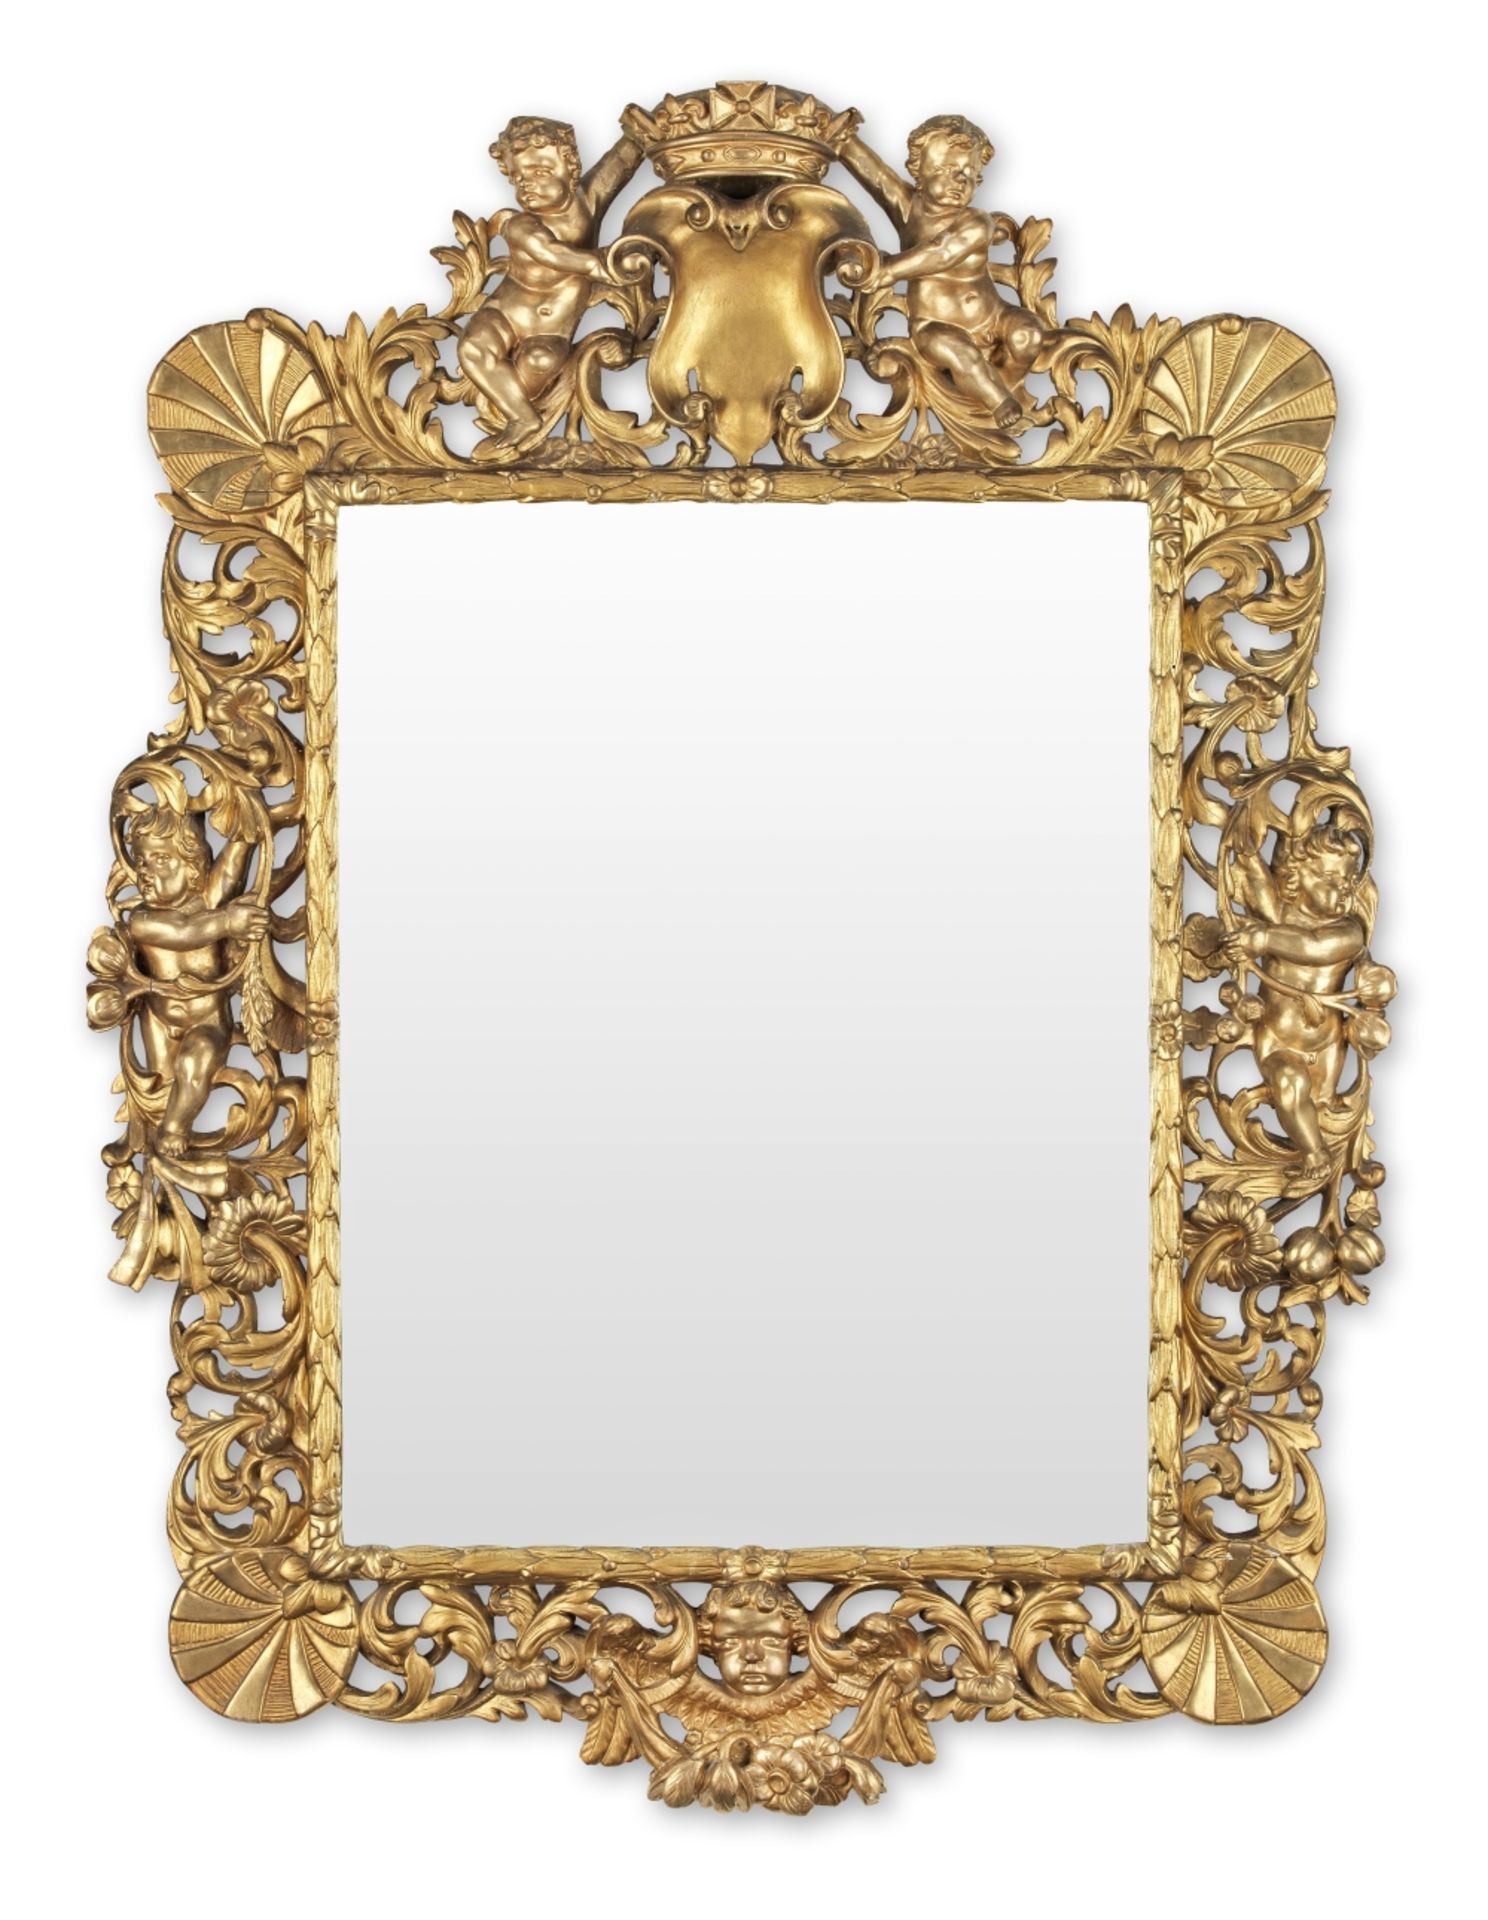 A Spanish or Italian 18th century carved giltwood mirror or picture frame